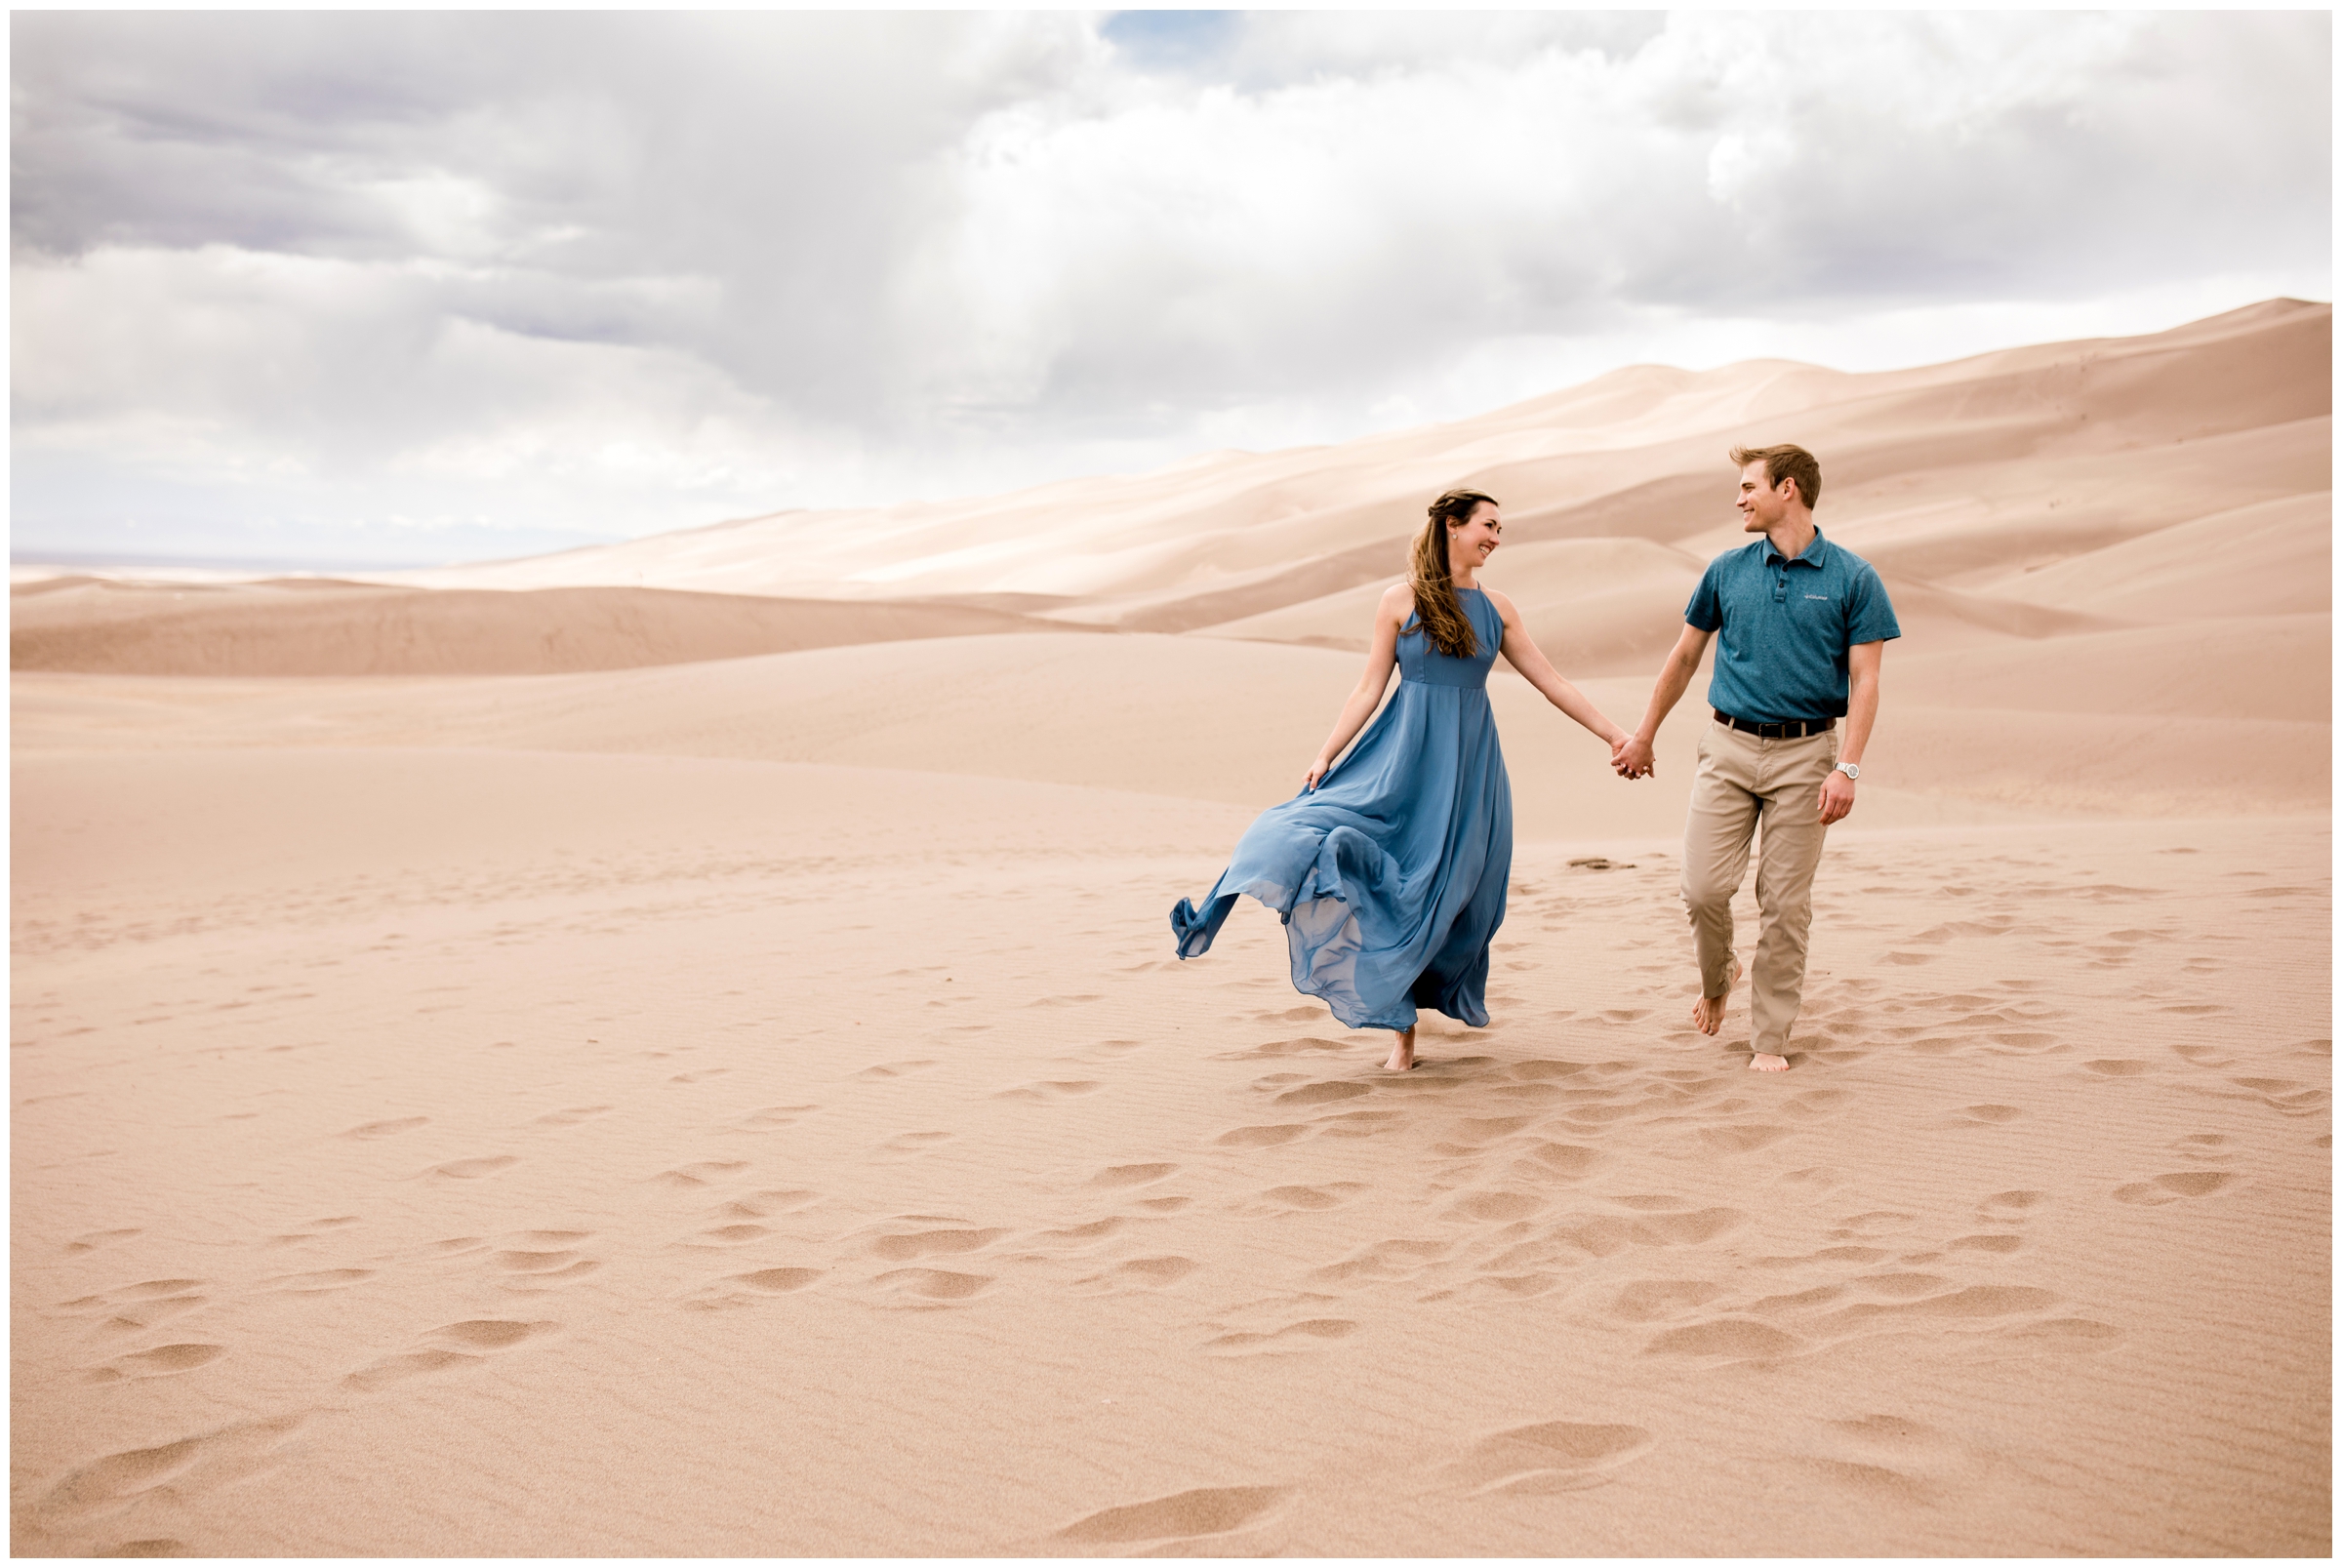 adventure engagement photography inspiration at Great Sand Dunes National Park Colorado 